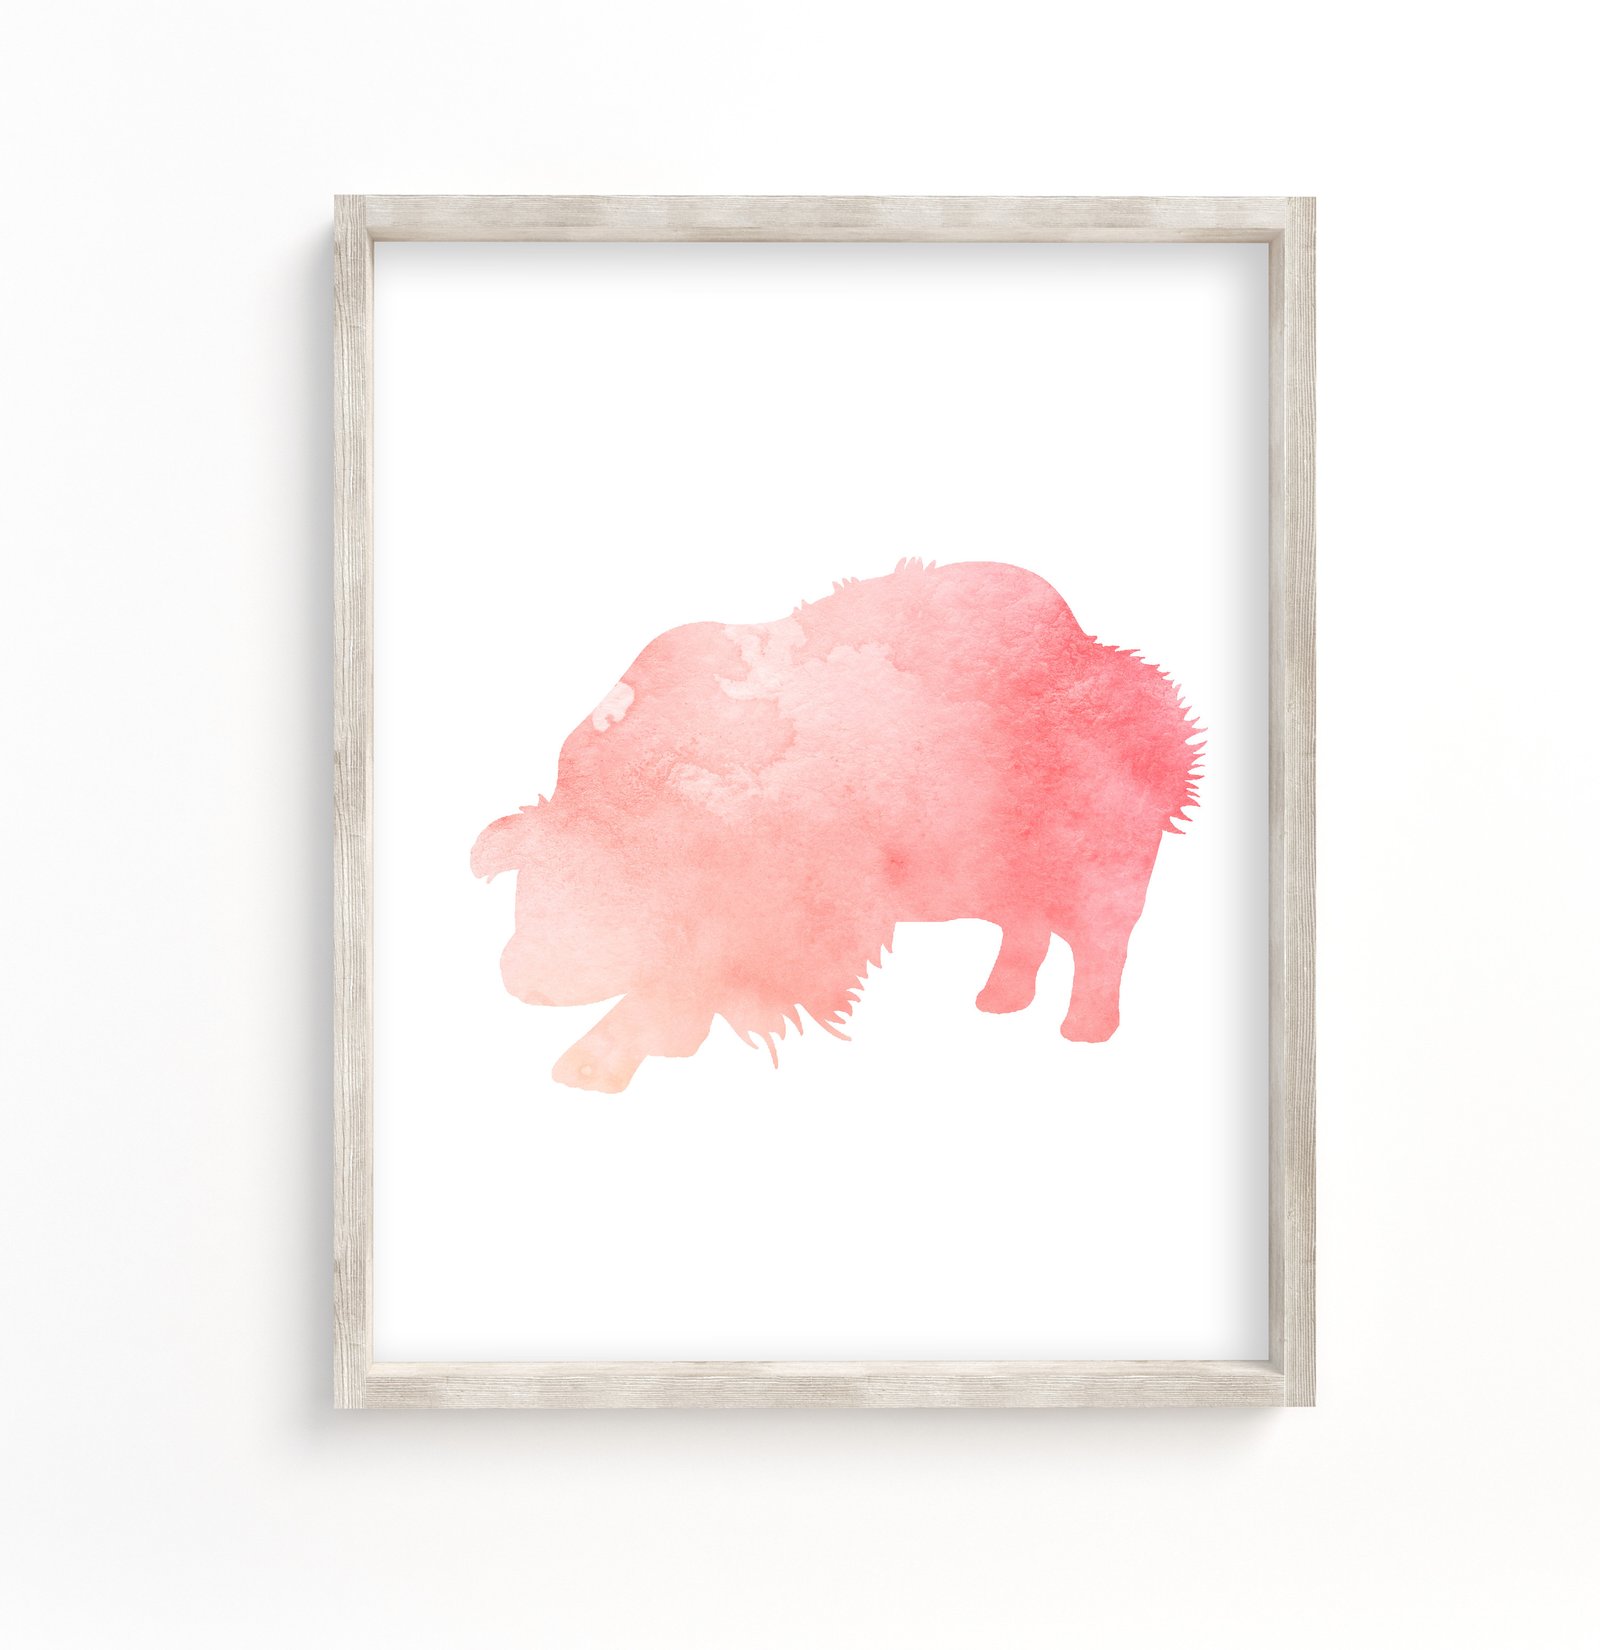 art print showing a pink border collie silhouette